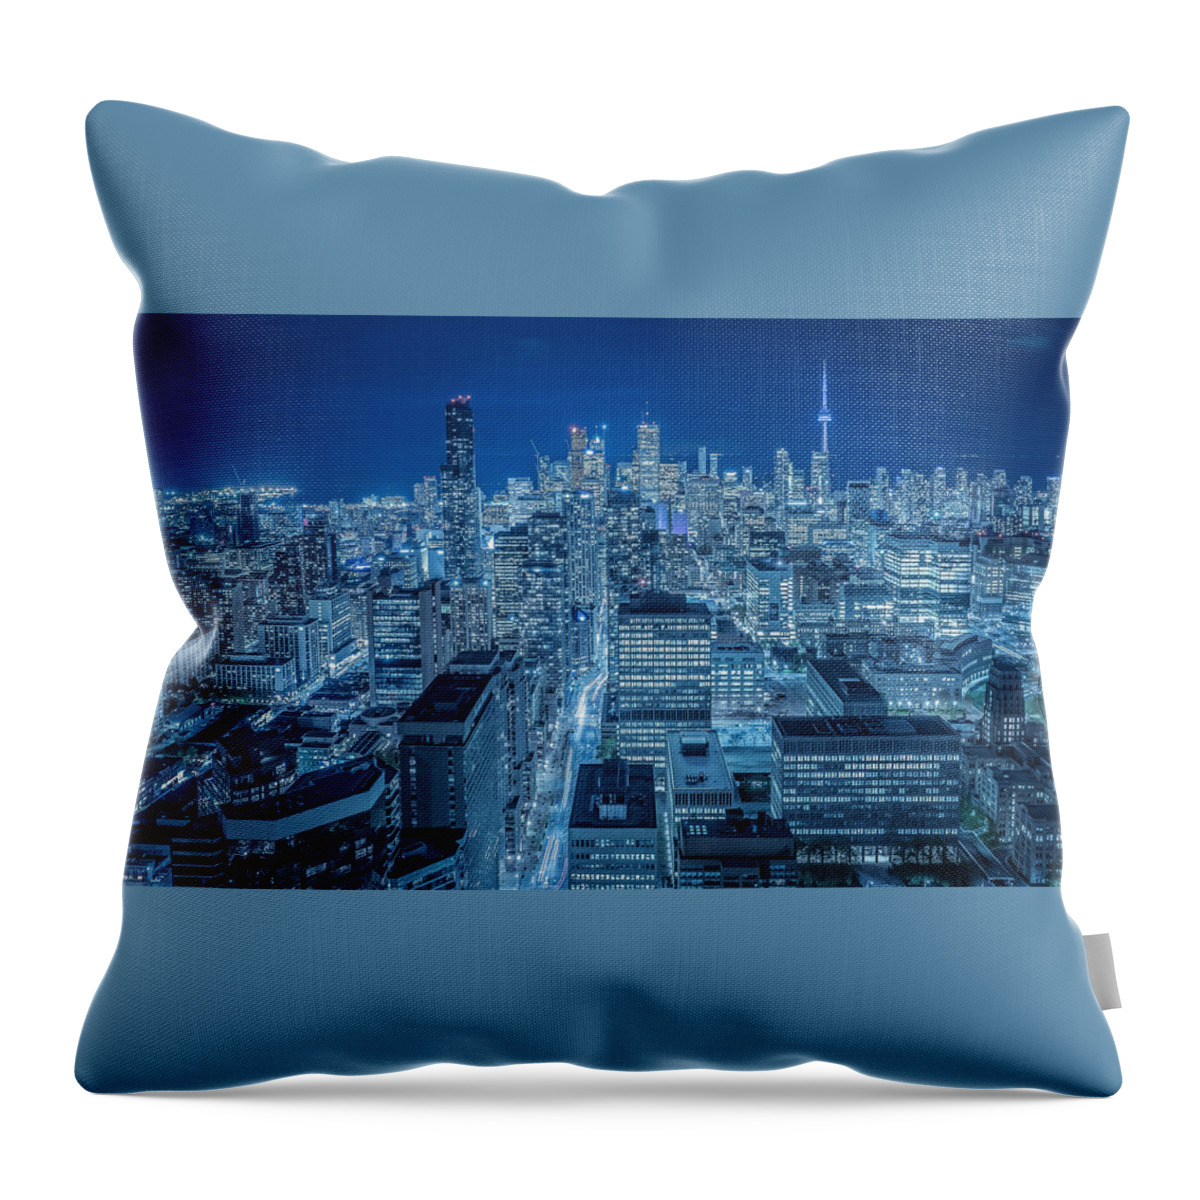 Toronto Throw Pillow featuring the digital art Toronto by Super Lovely